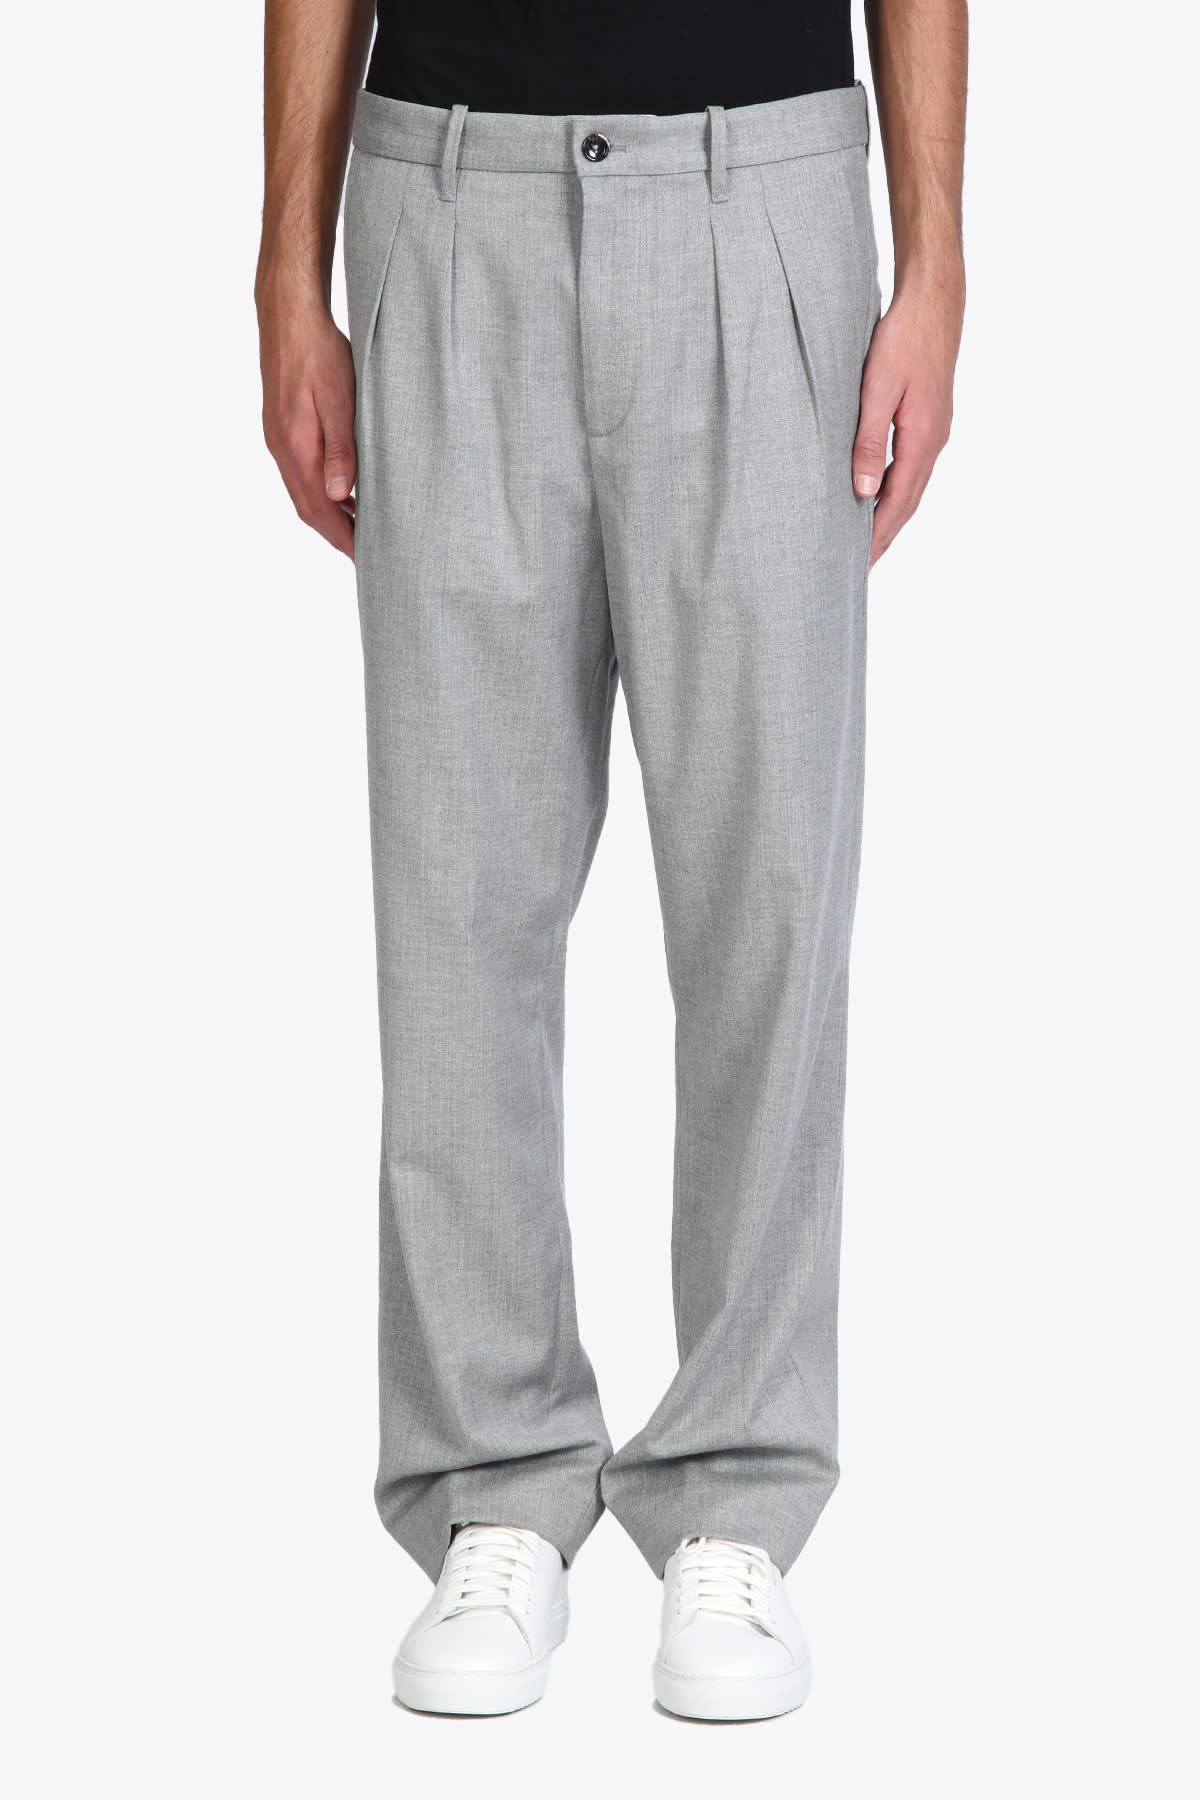 Nine in the Morning Marco - Baggy Chino Light grey tailored pleated baggy pant - Marco